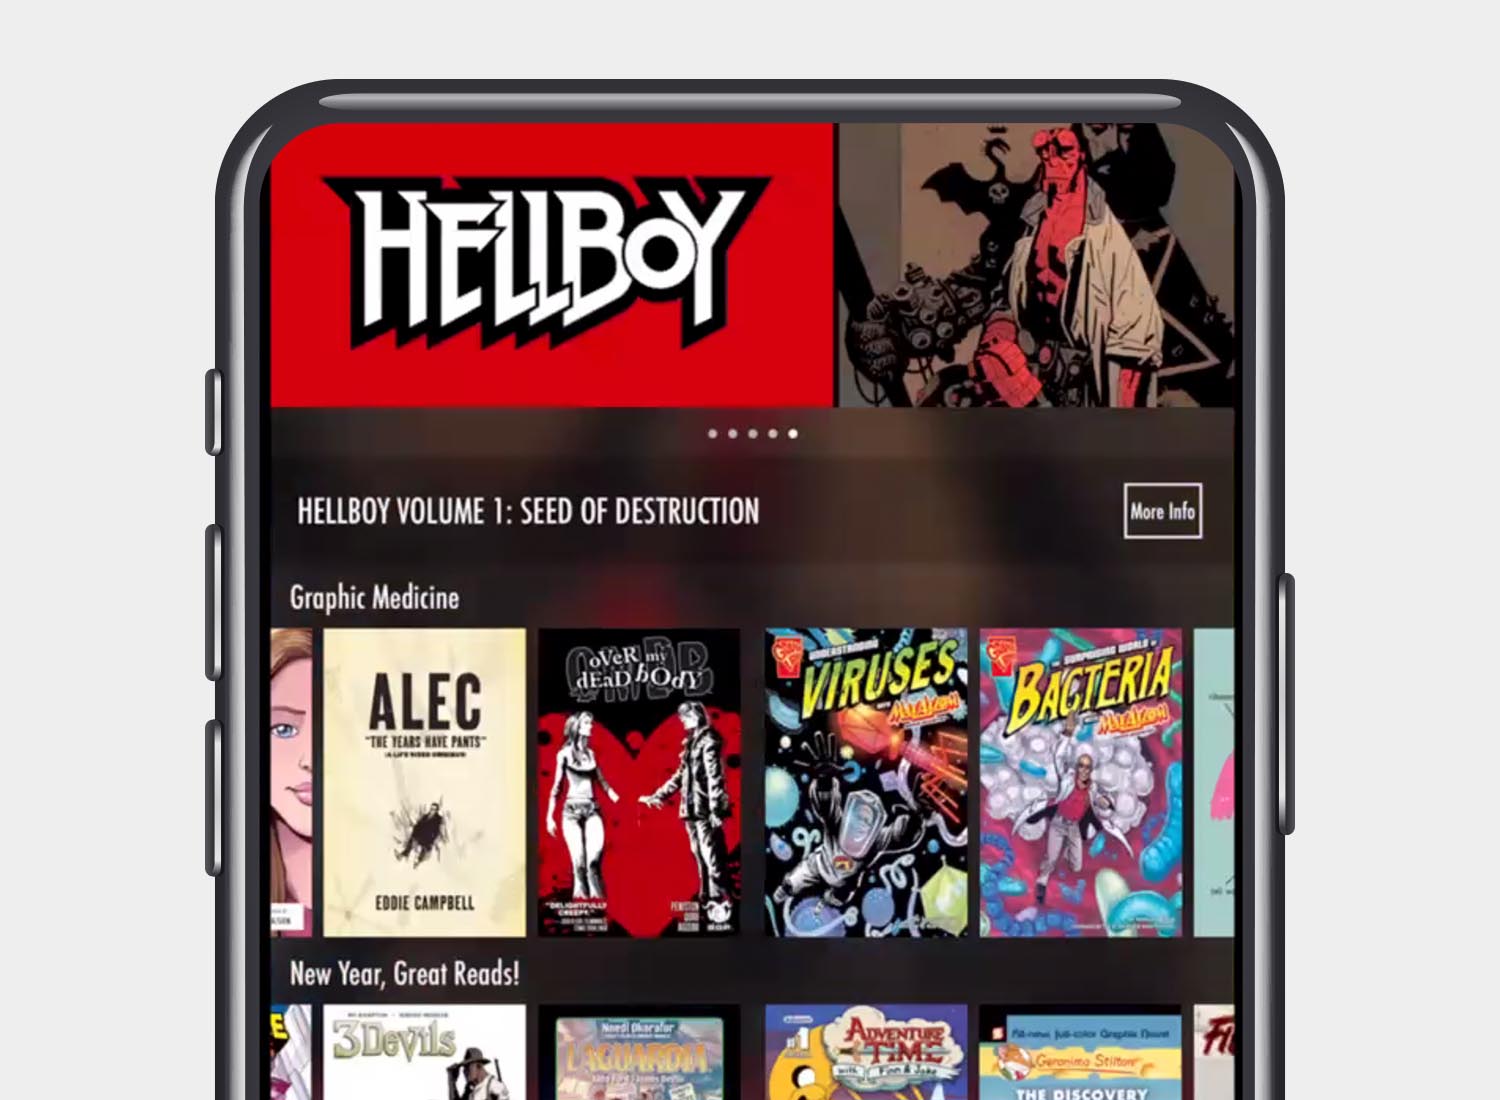 Browsing graphic novels on smartphone app